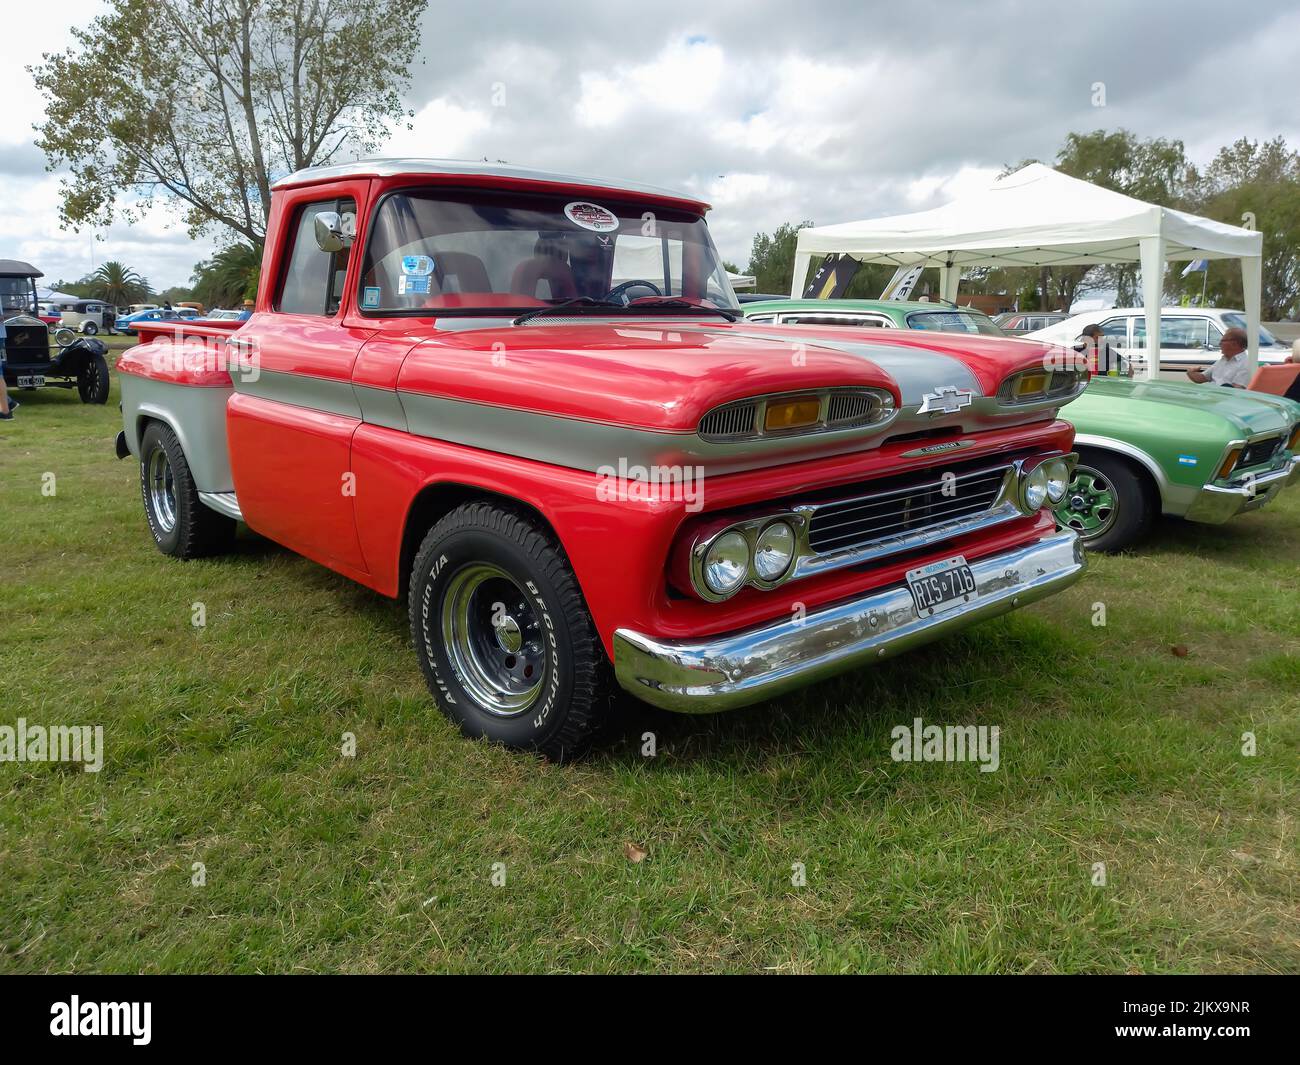 Chascomus, Argentina - Apr 09, 2022: Old red Chevrolet Chevy C10 Apache pickup truck 1960-1961. Green grass nature background. Utility or farming tool Stock Photo